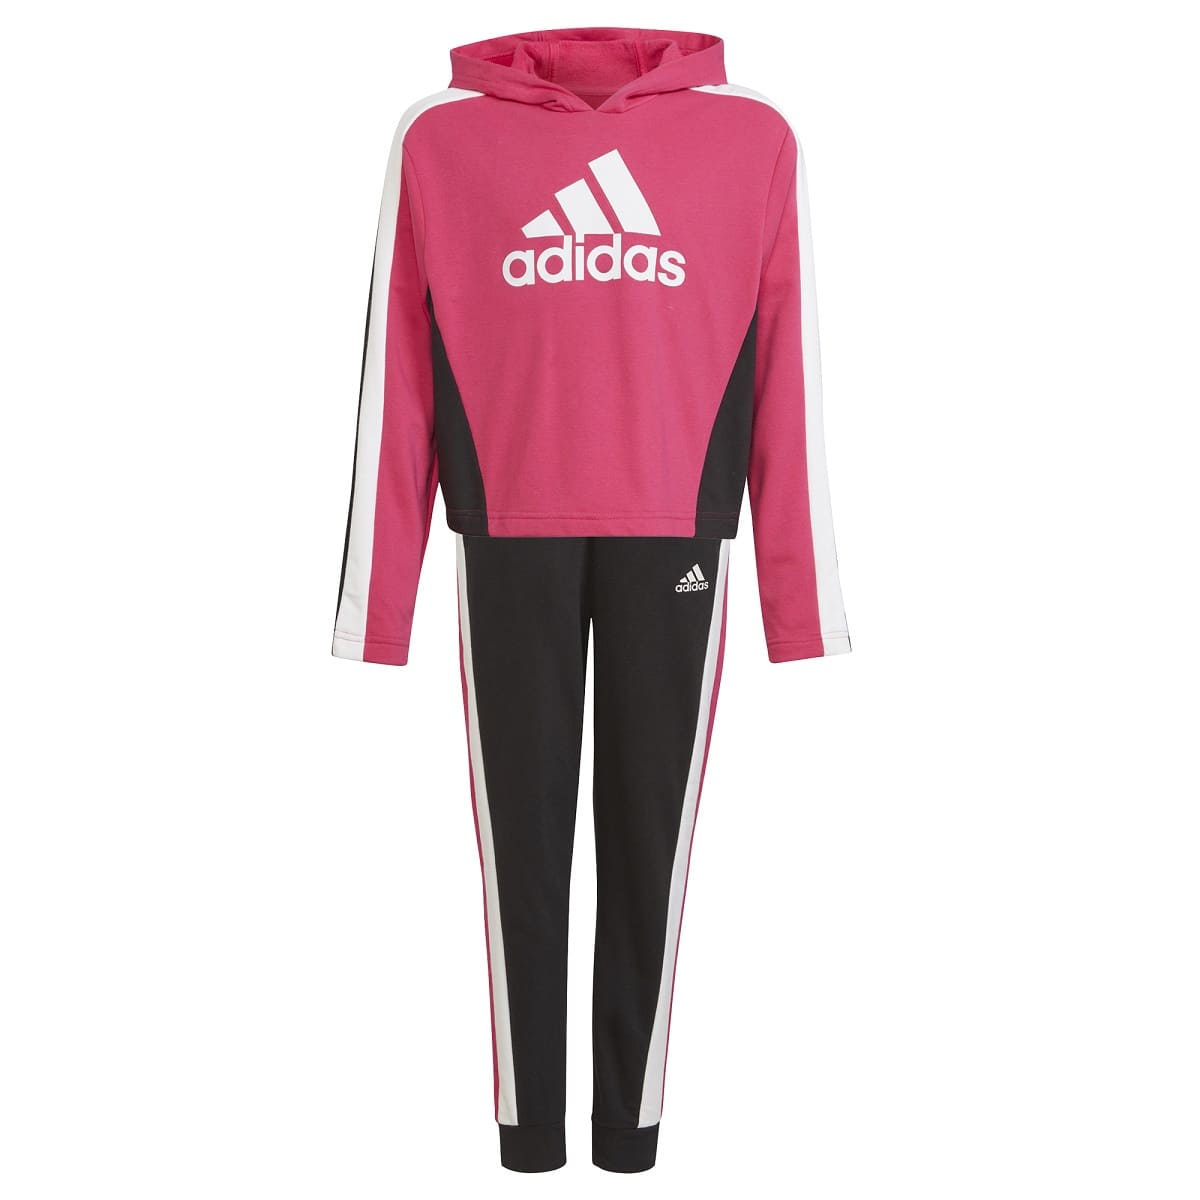 Adidas Girls Hooded Cropped Top Tracksuit